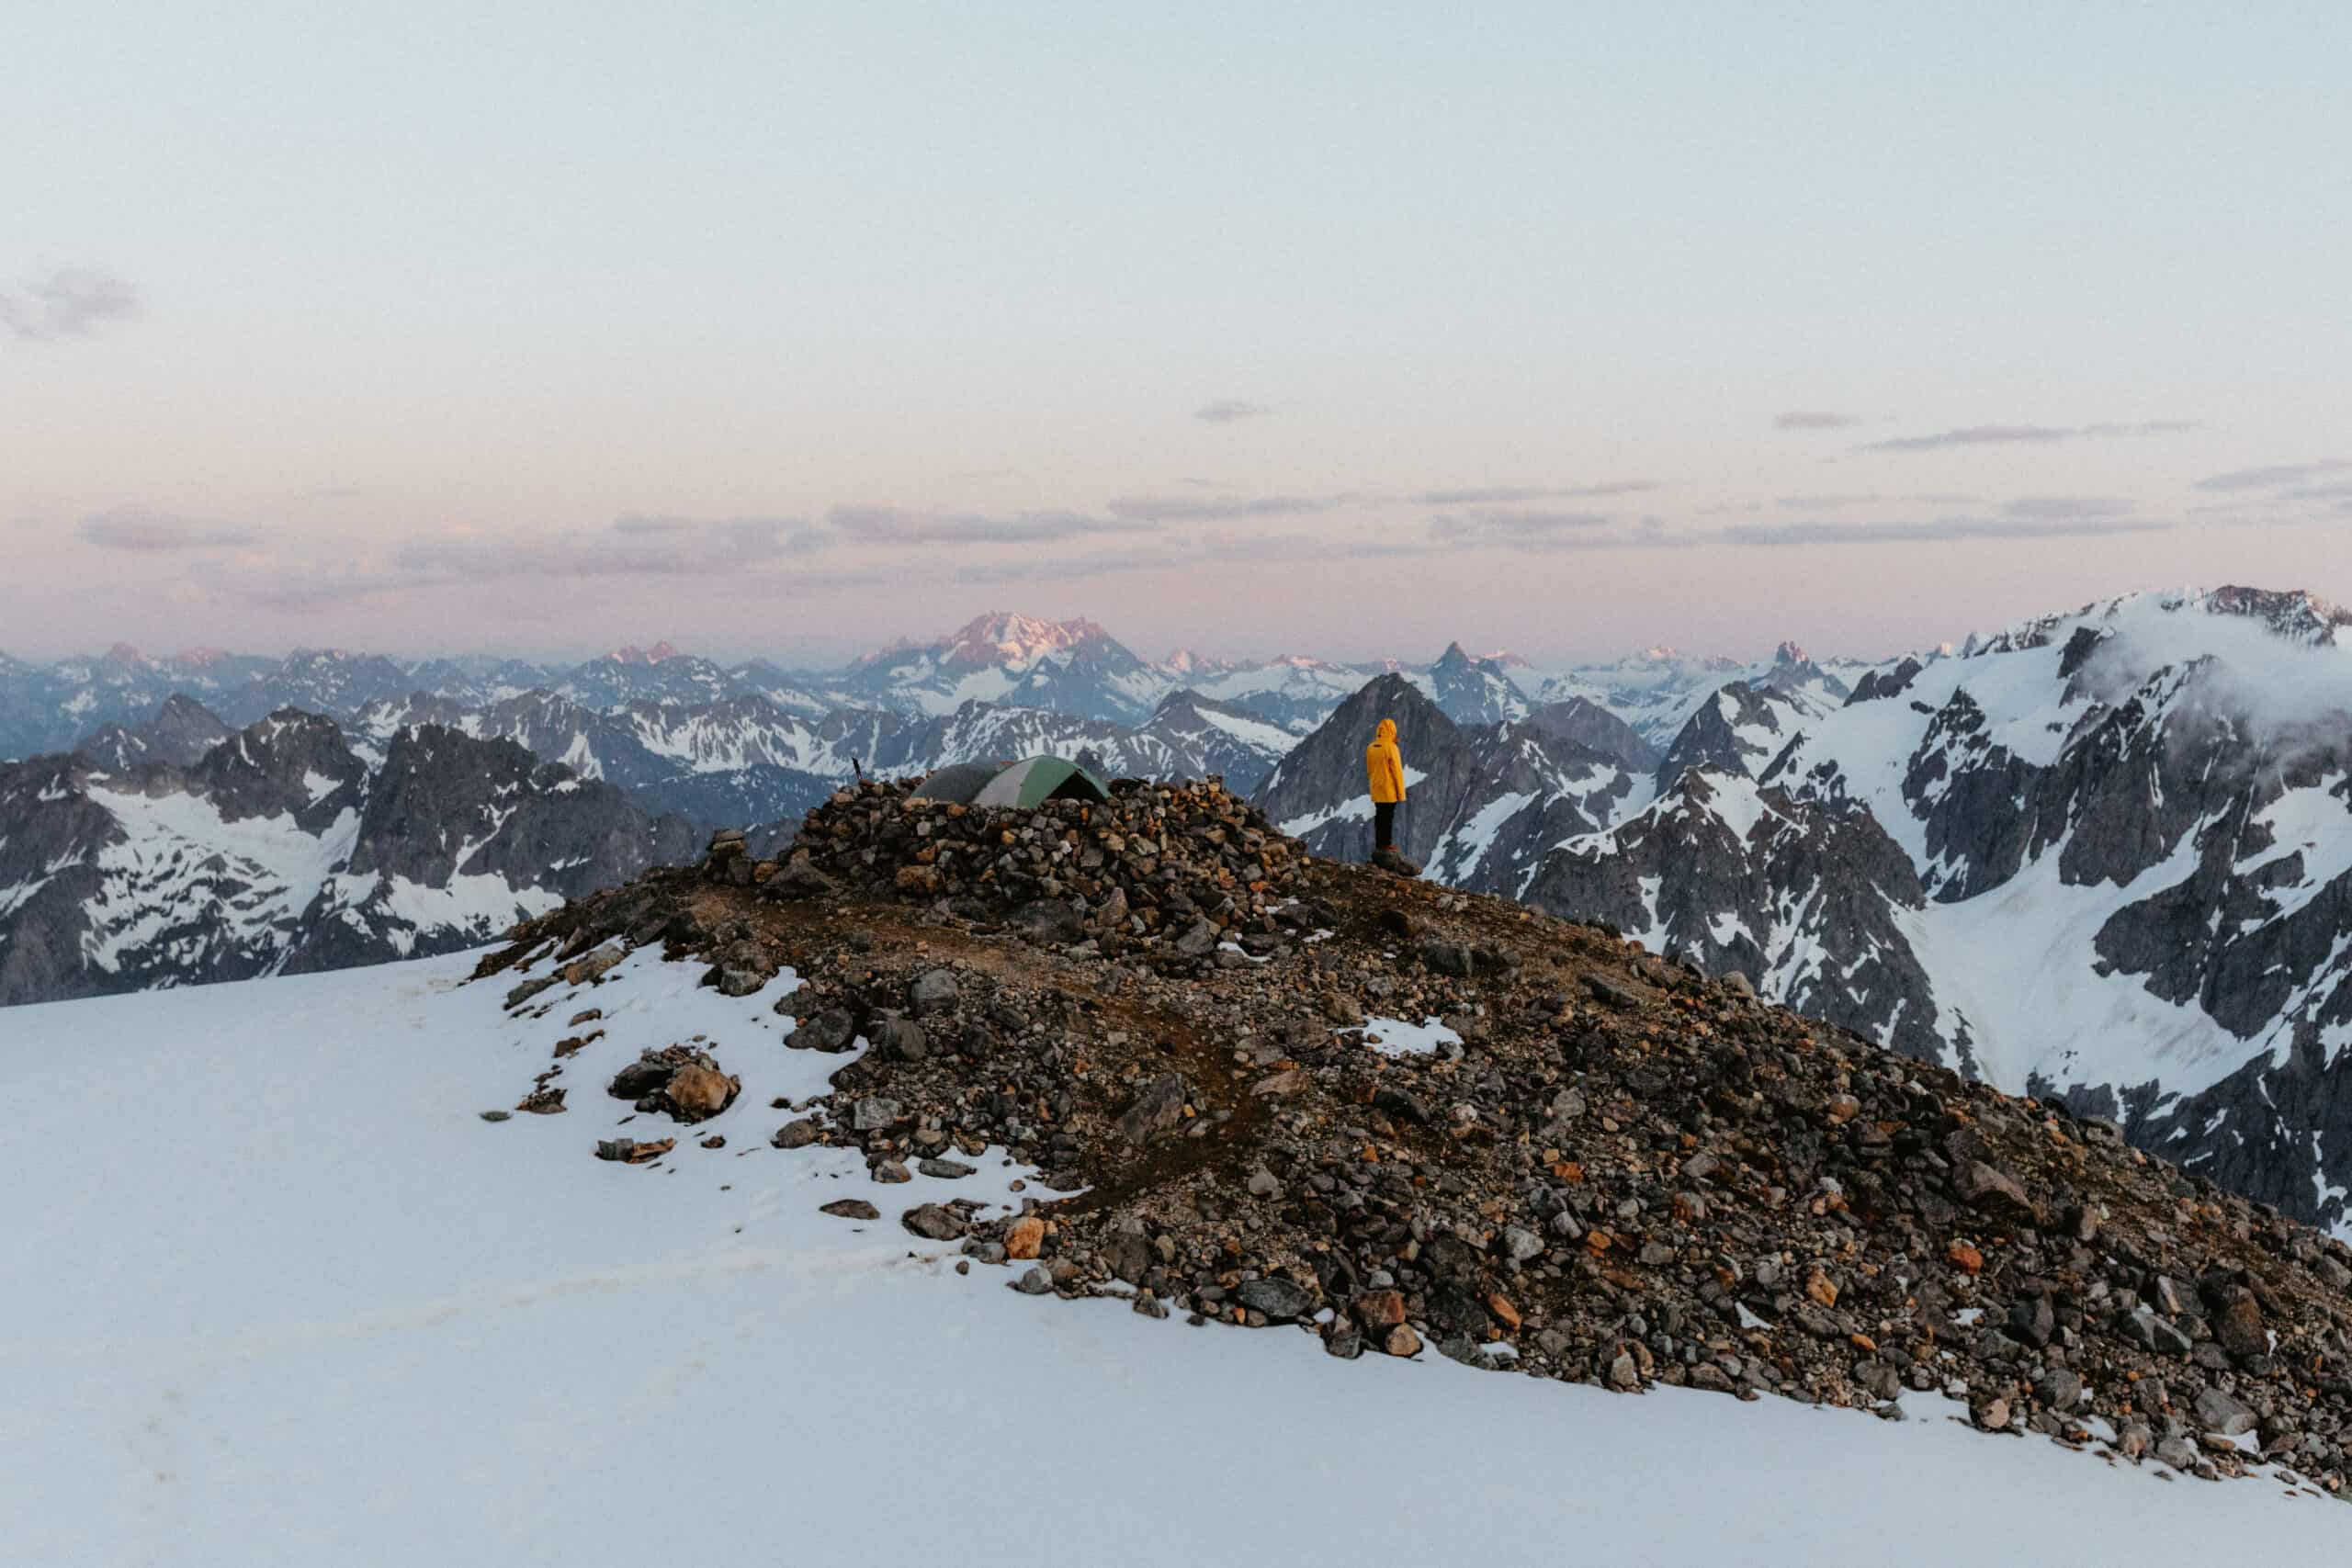 The Guide To Sahale Glacier Camp (Permits, Hiking At This North Cascades Campsite)